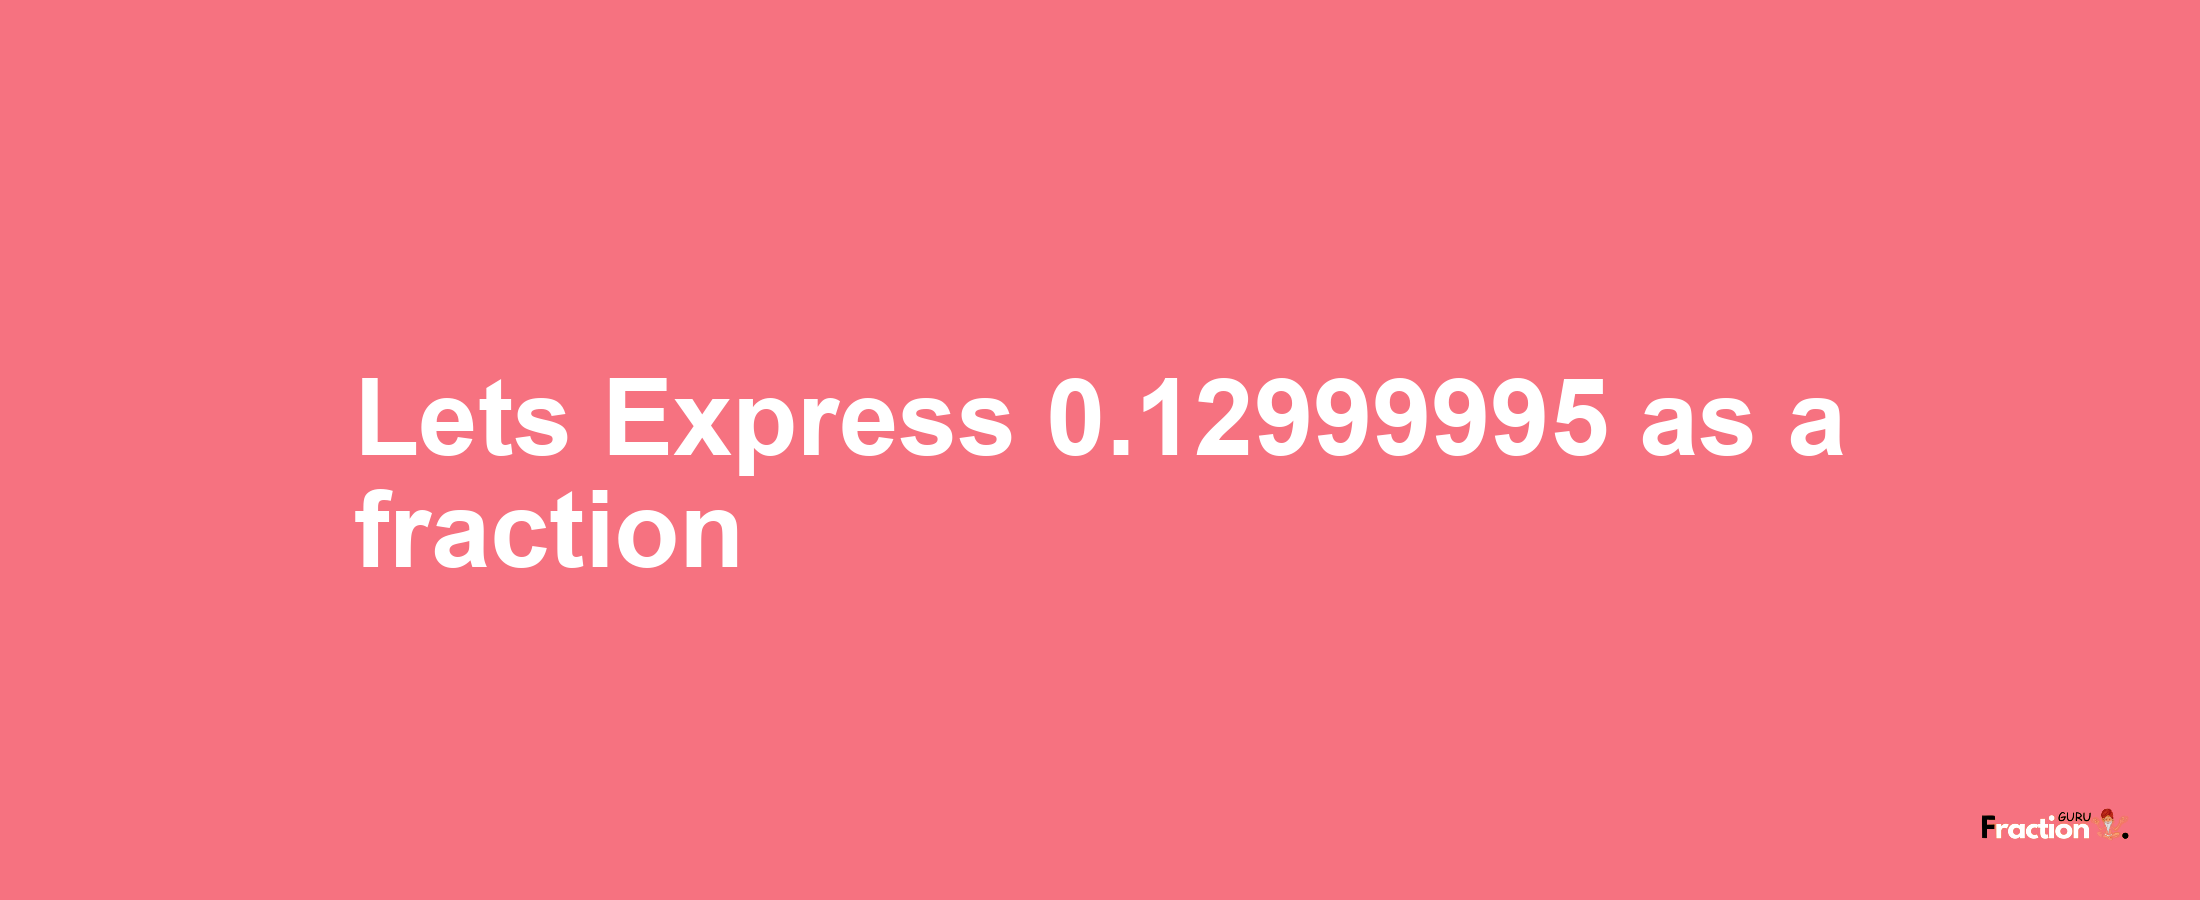 Lets Express 0.12999995 as afraction